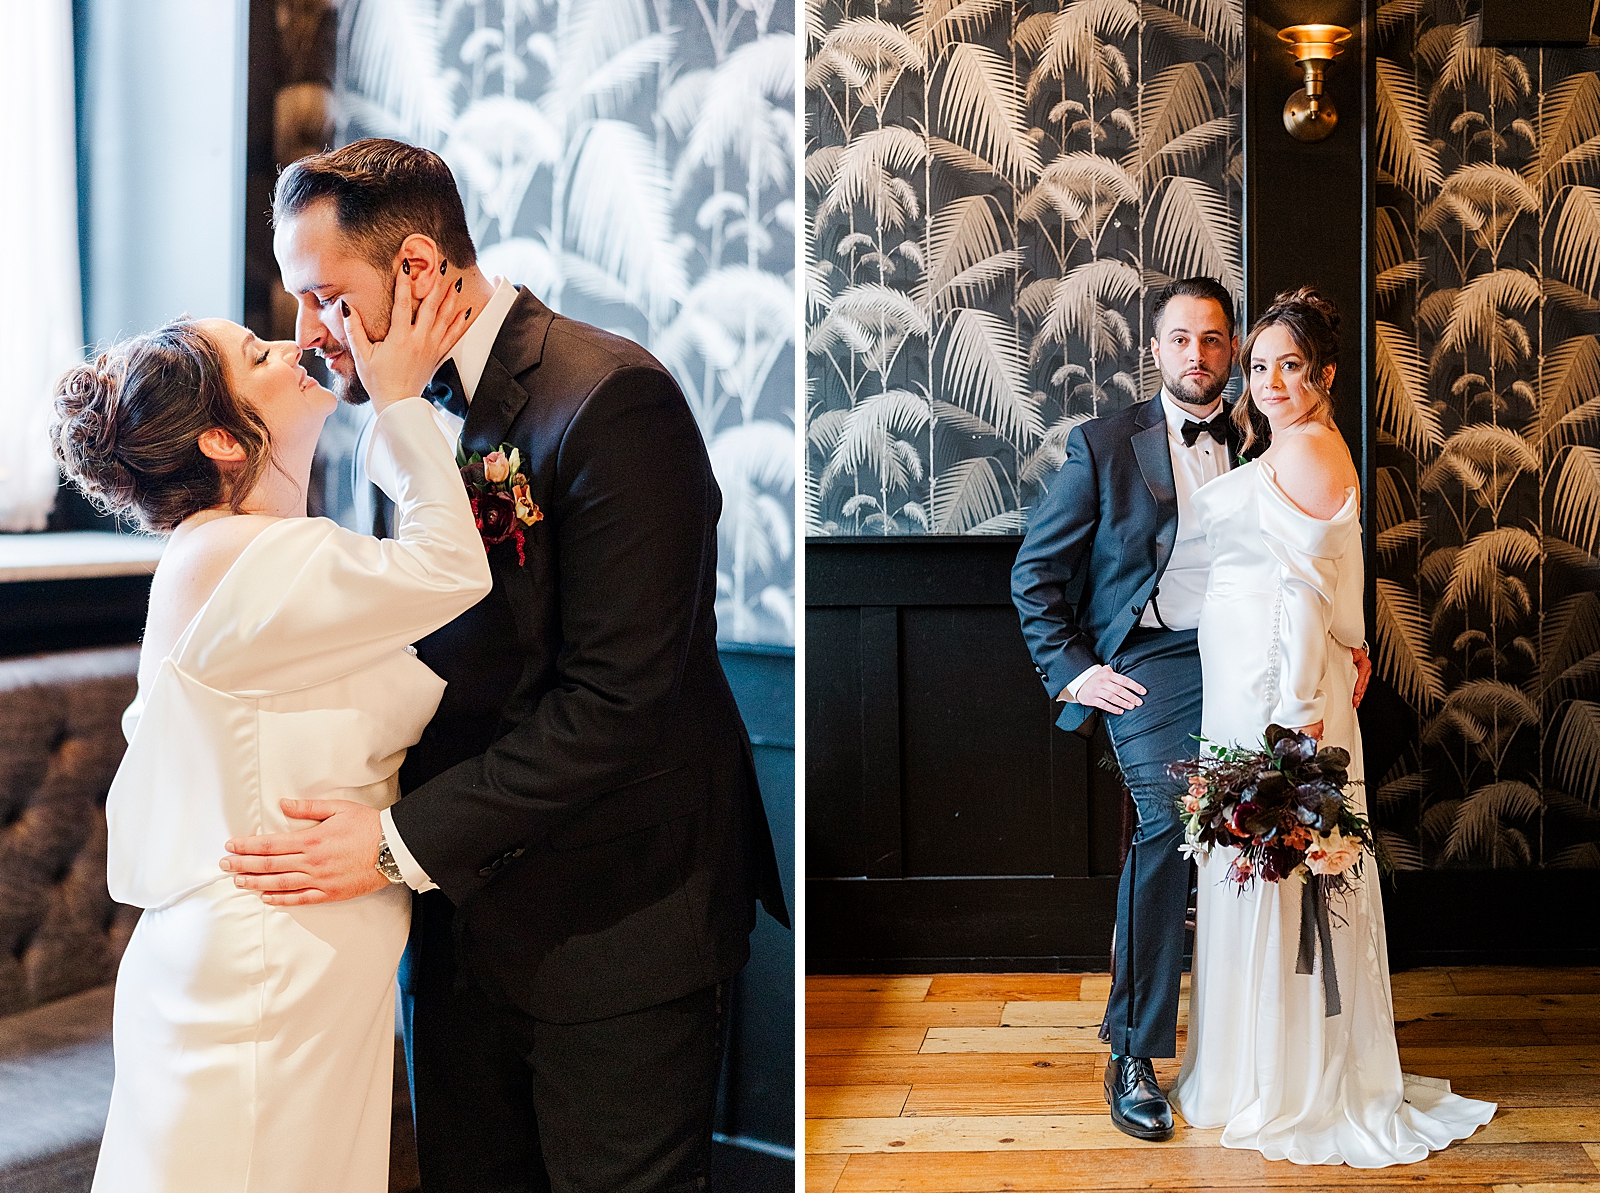 Left photo: Upper body shot of the couple sharing a kiss. 
Right photo: Full body shot of the bride and groom posing for the camera.